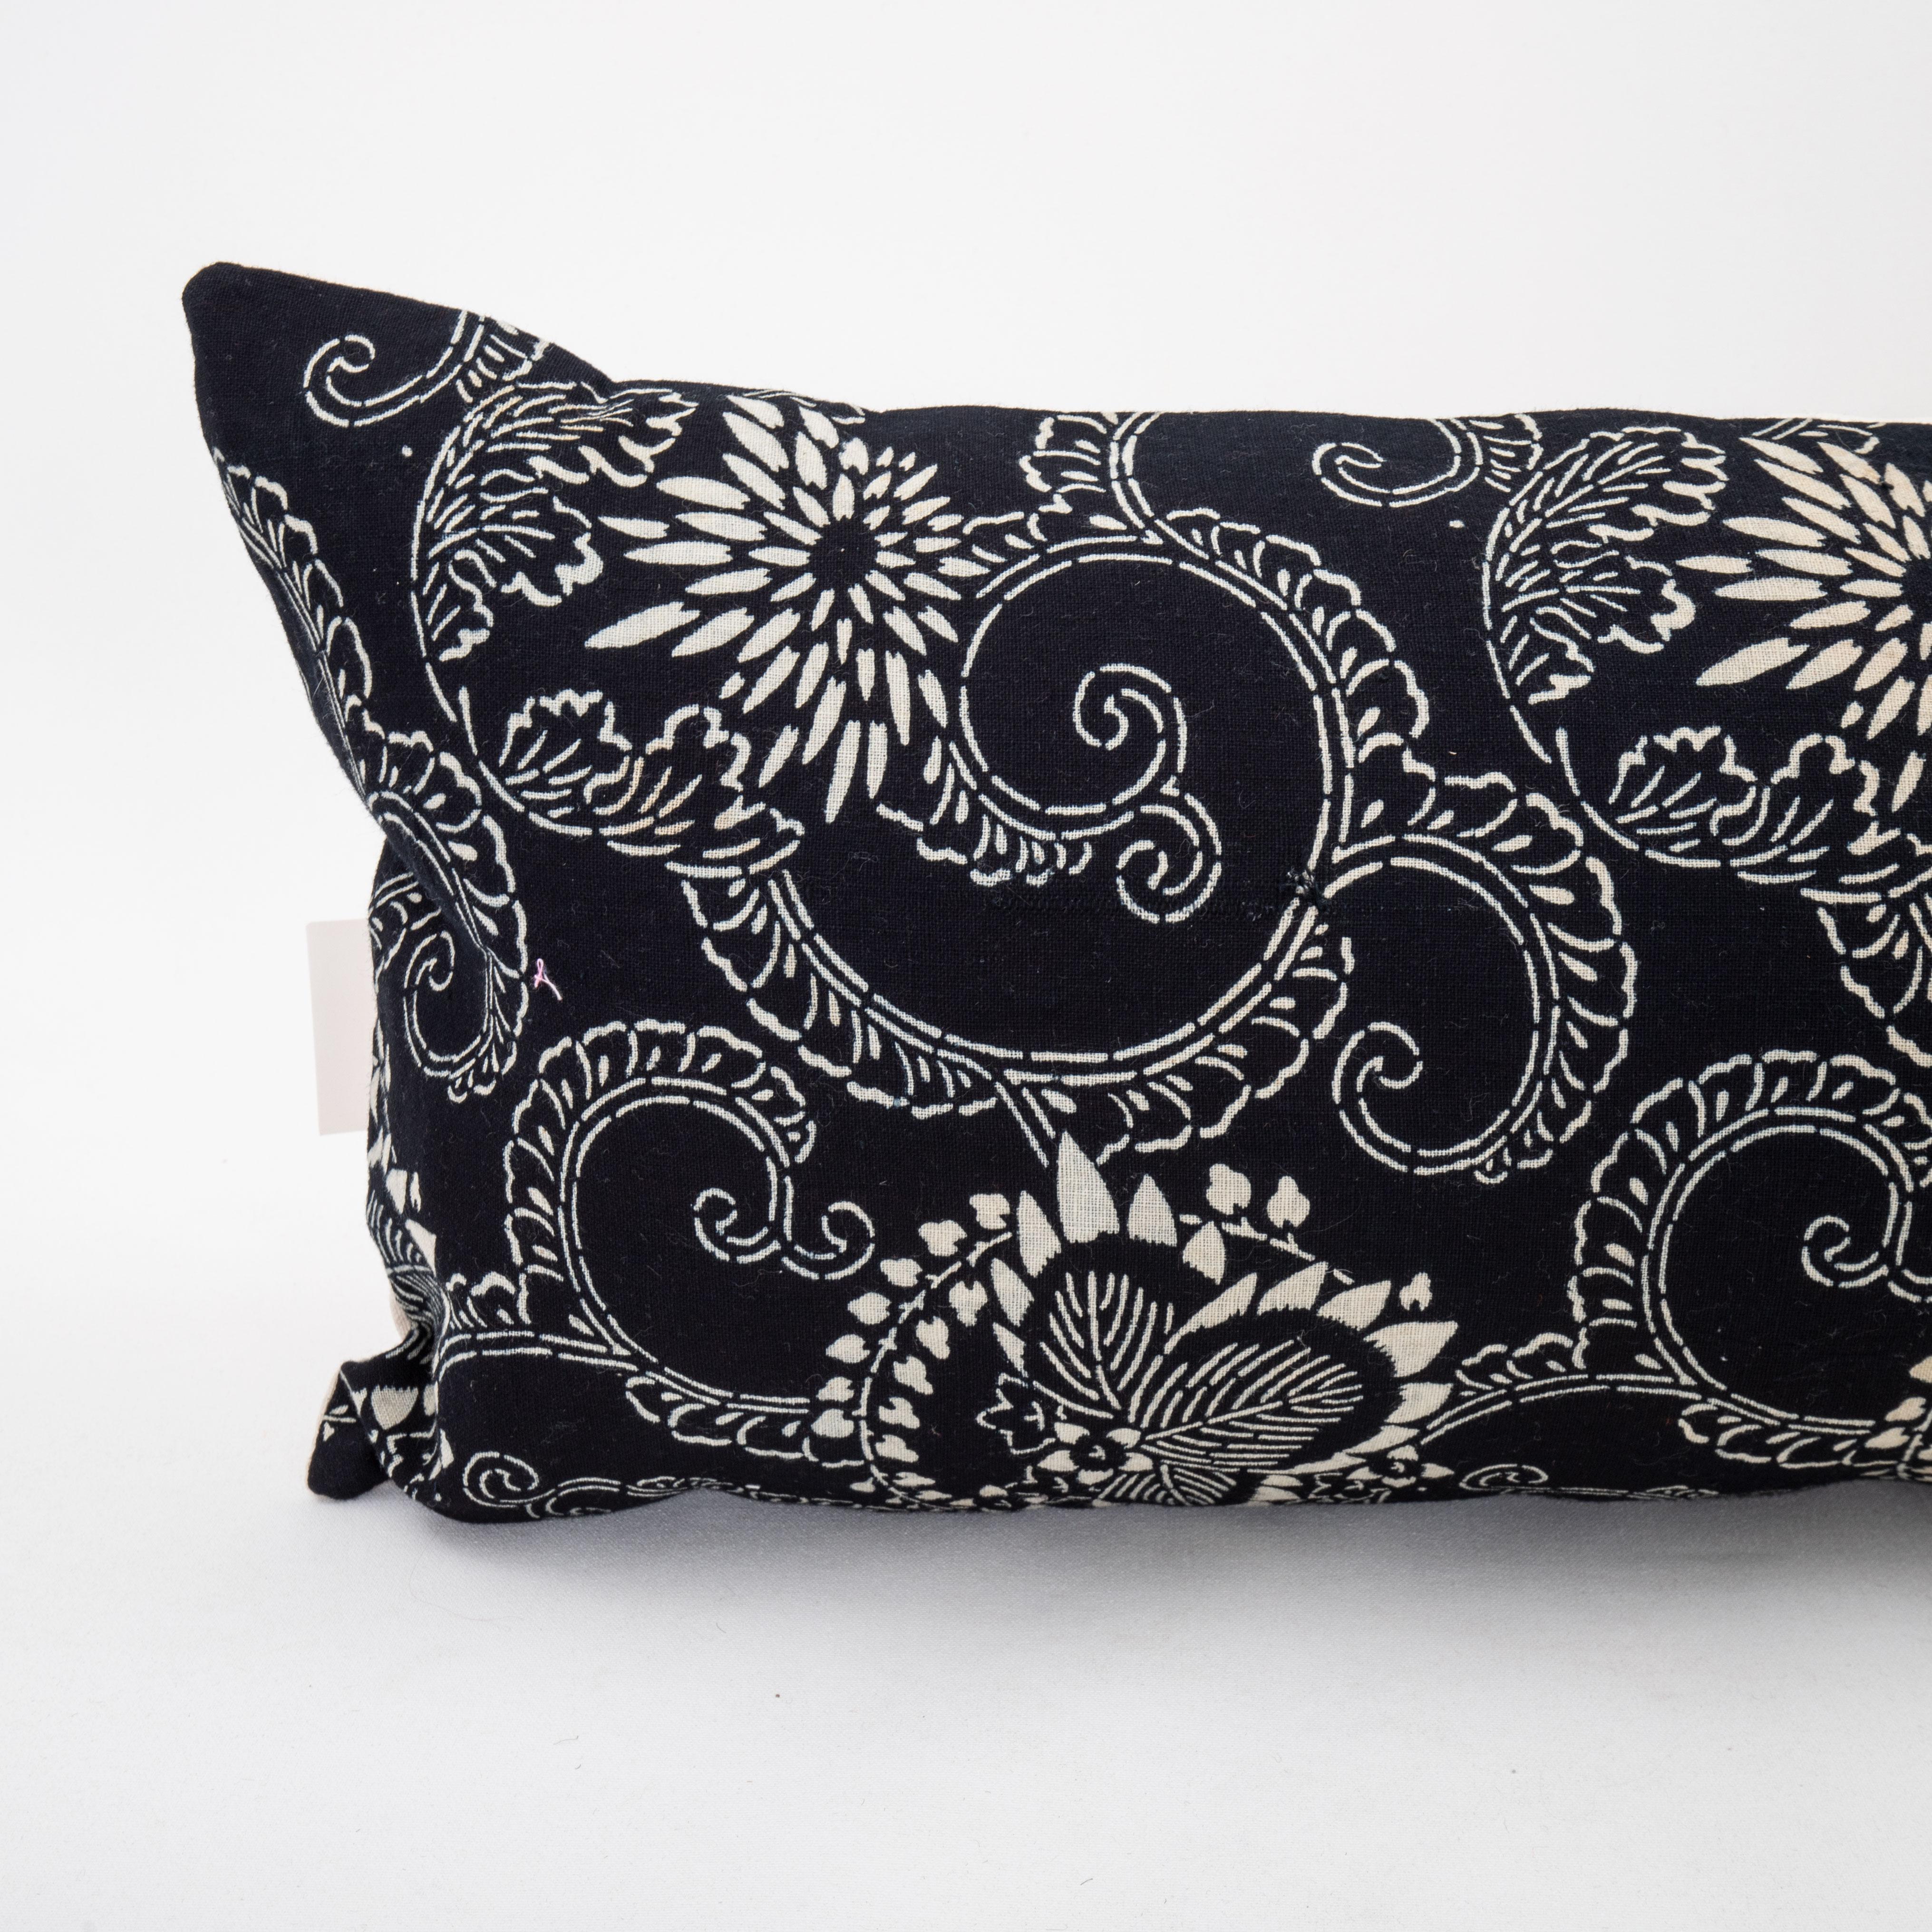 Vintage Japanese Indigo Batik Lumbar Pillow Case In Good Condition For Sale In Istanbul, TR